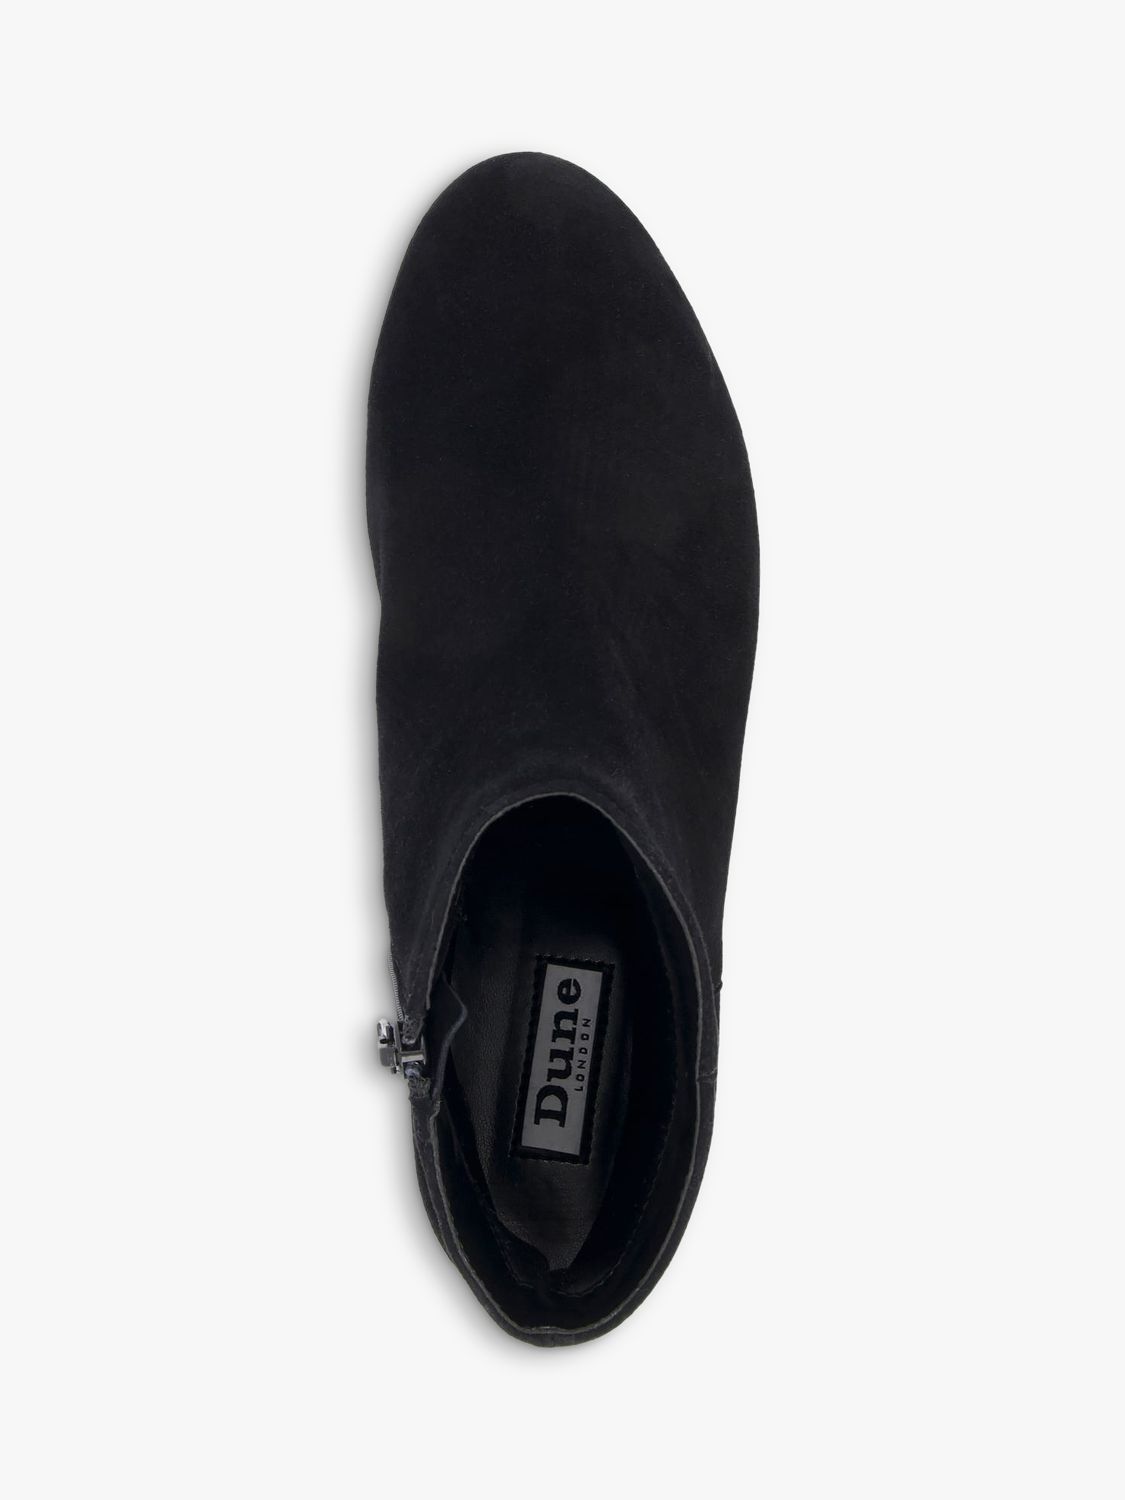 Dune Pippie Suede Block Heel Ankle Boots, Black at John Lewis & Partners